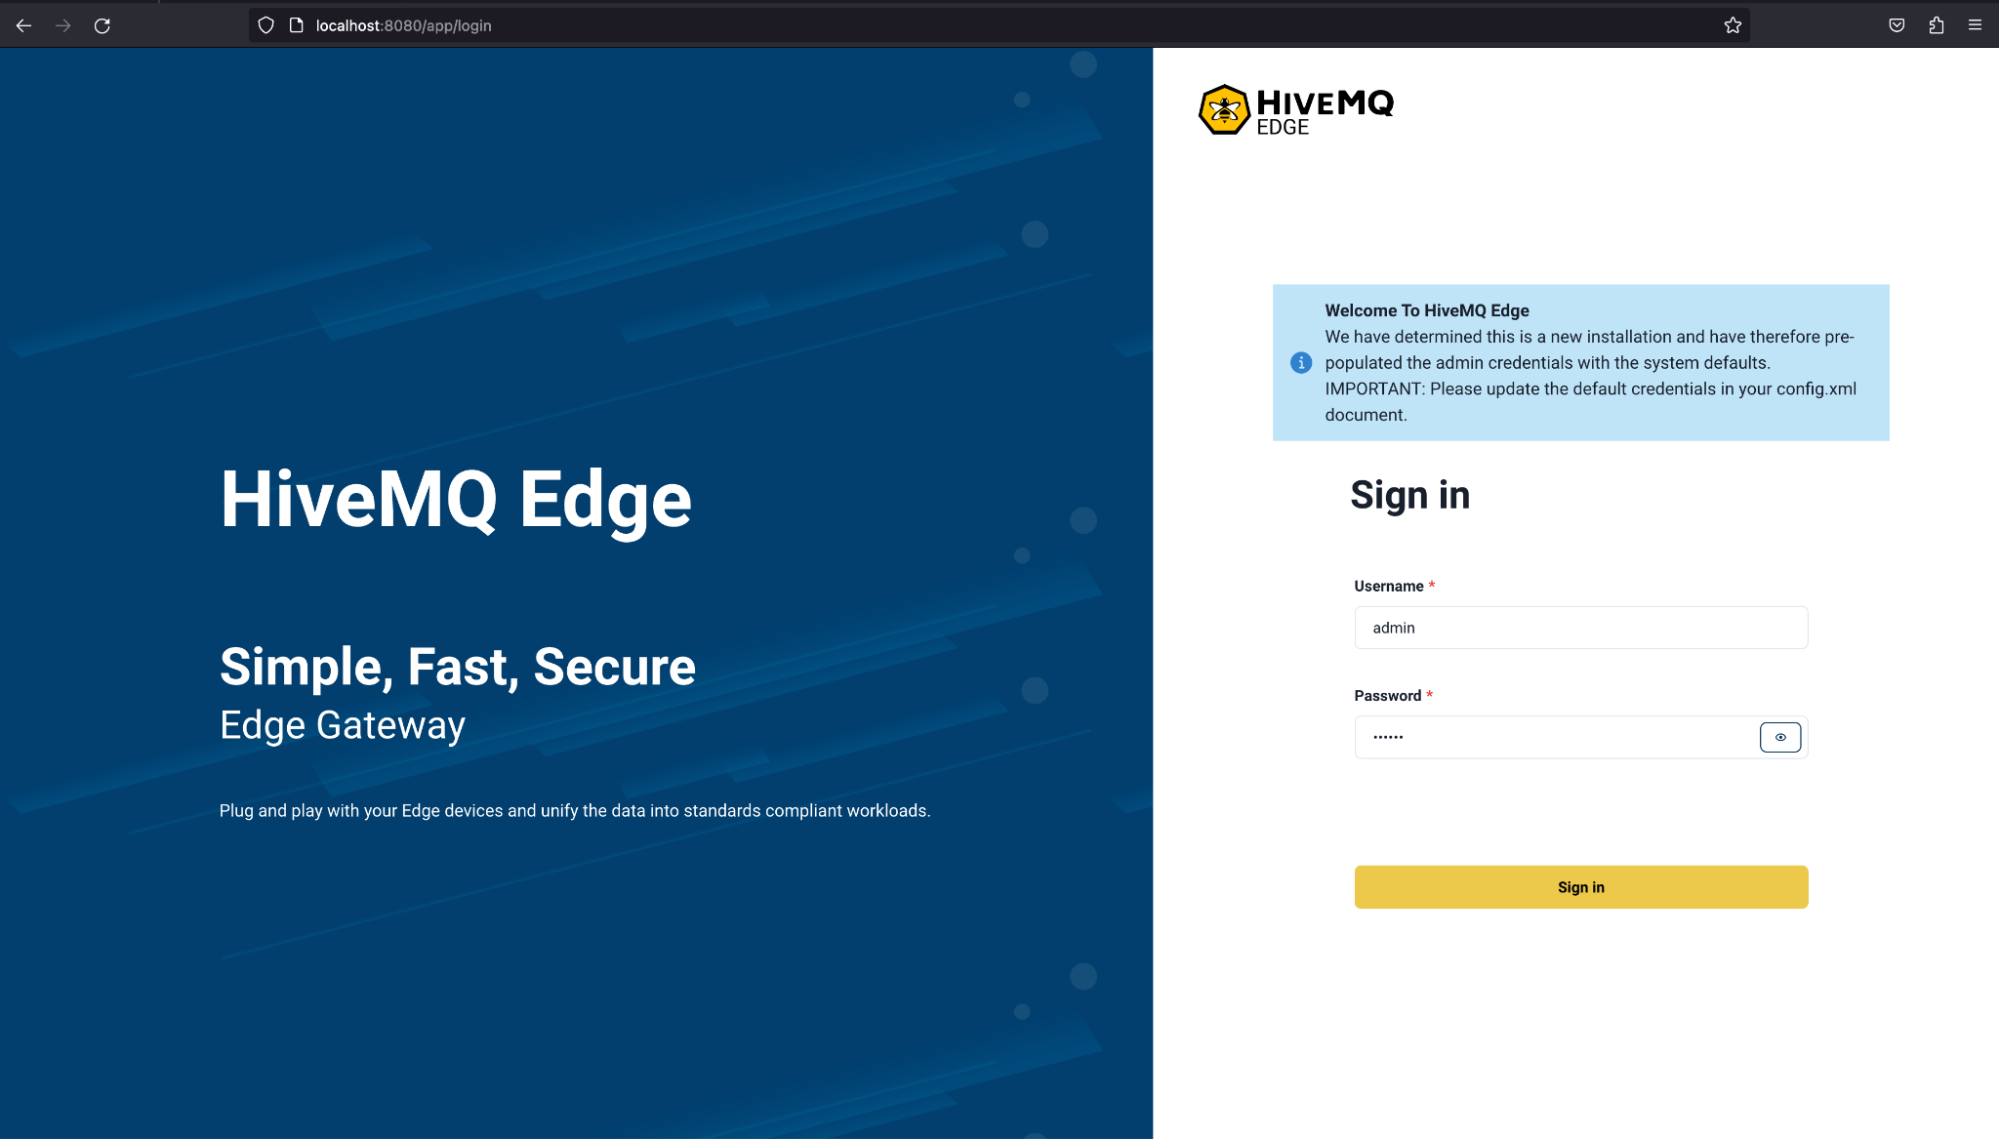 Accessing the HiveMQ Edge Interface